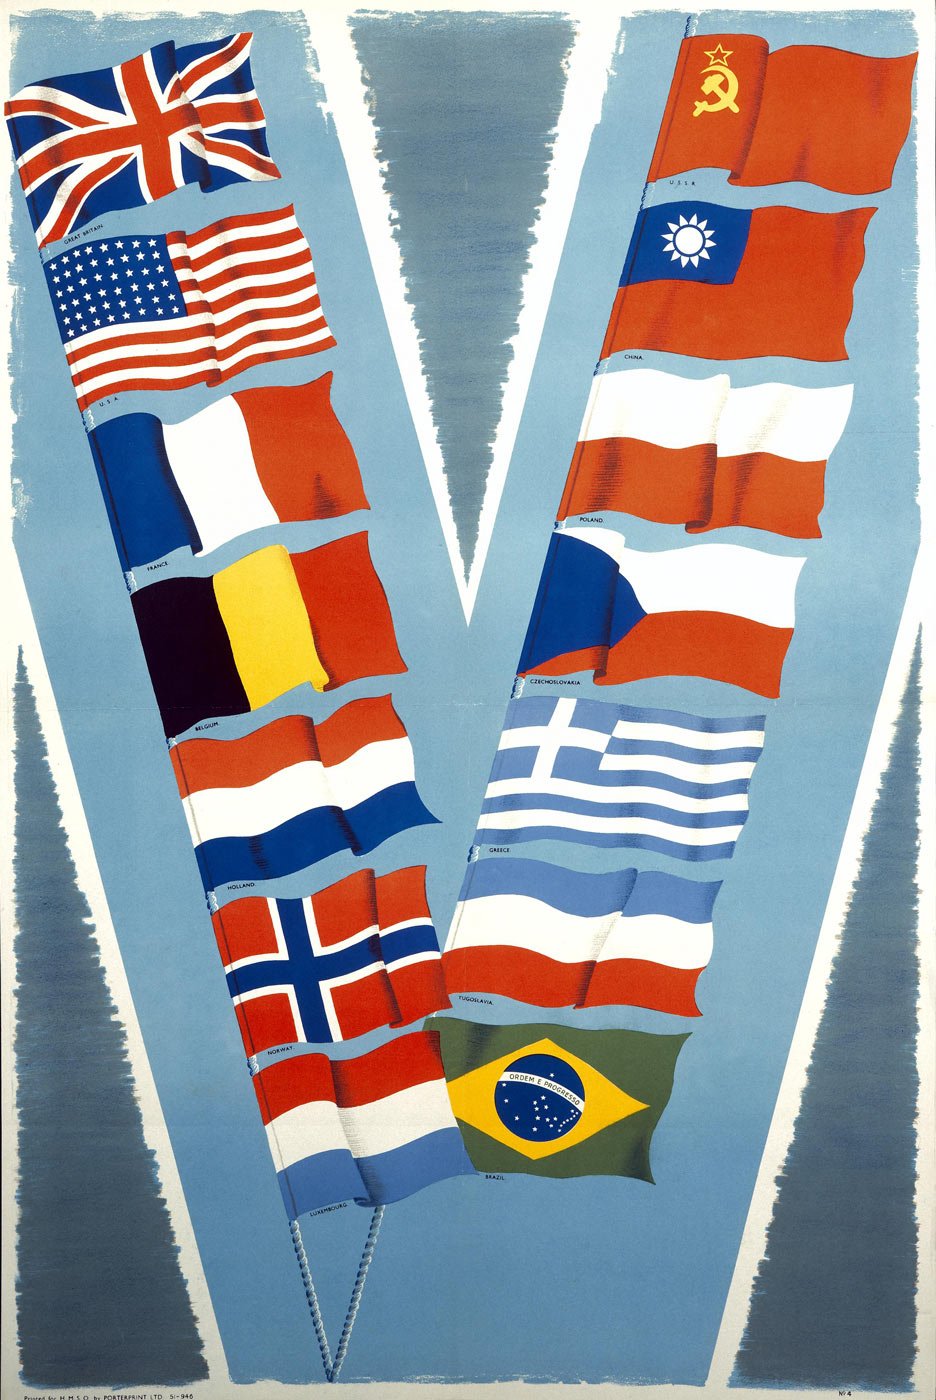 14 flags of the allied forces of WW2 are positioned in a 'V' formation on a blue background.